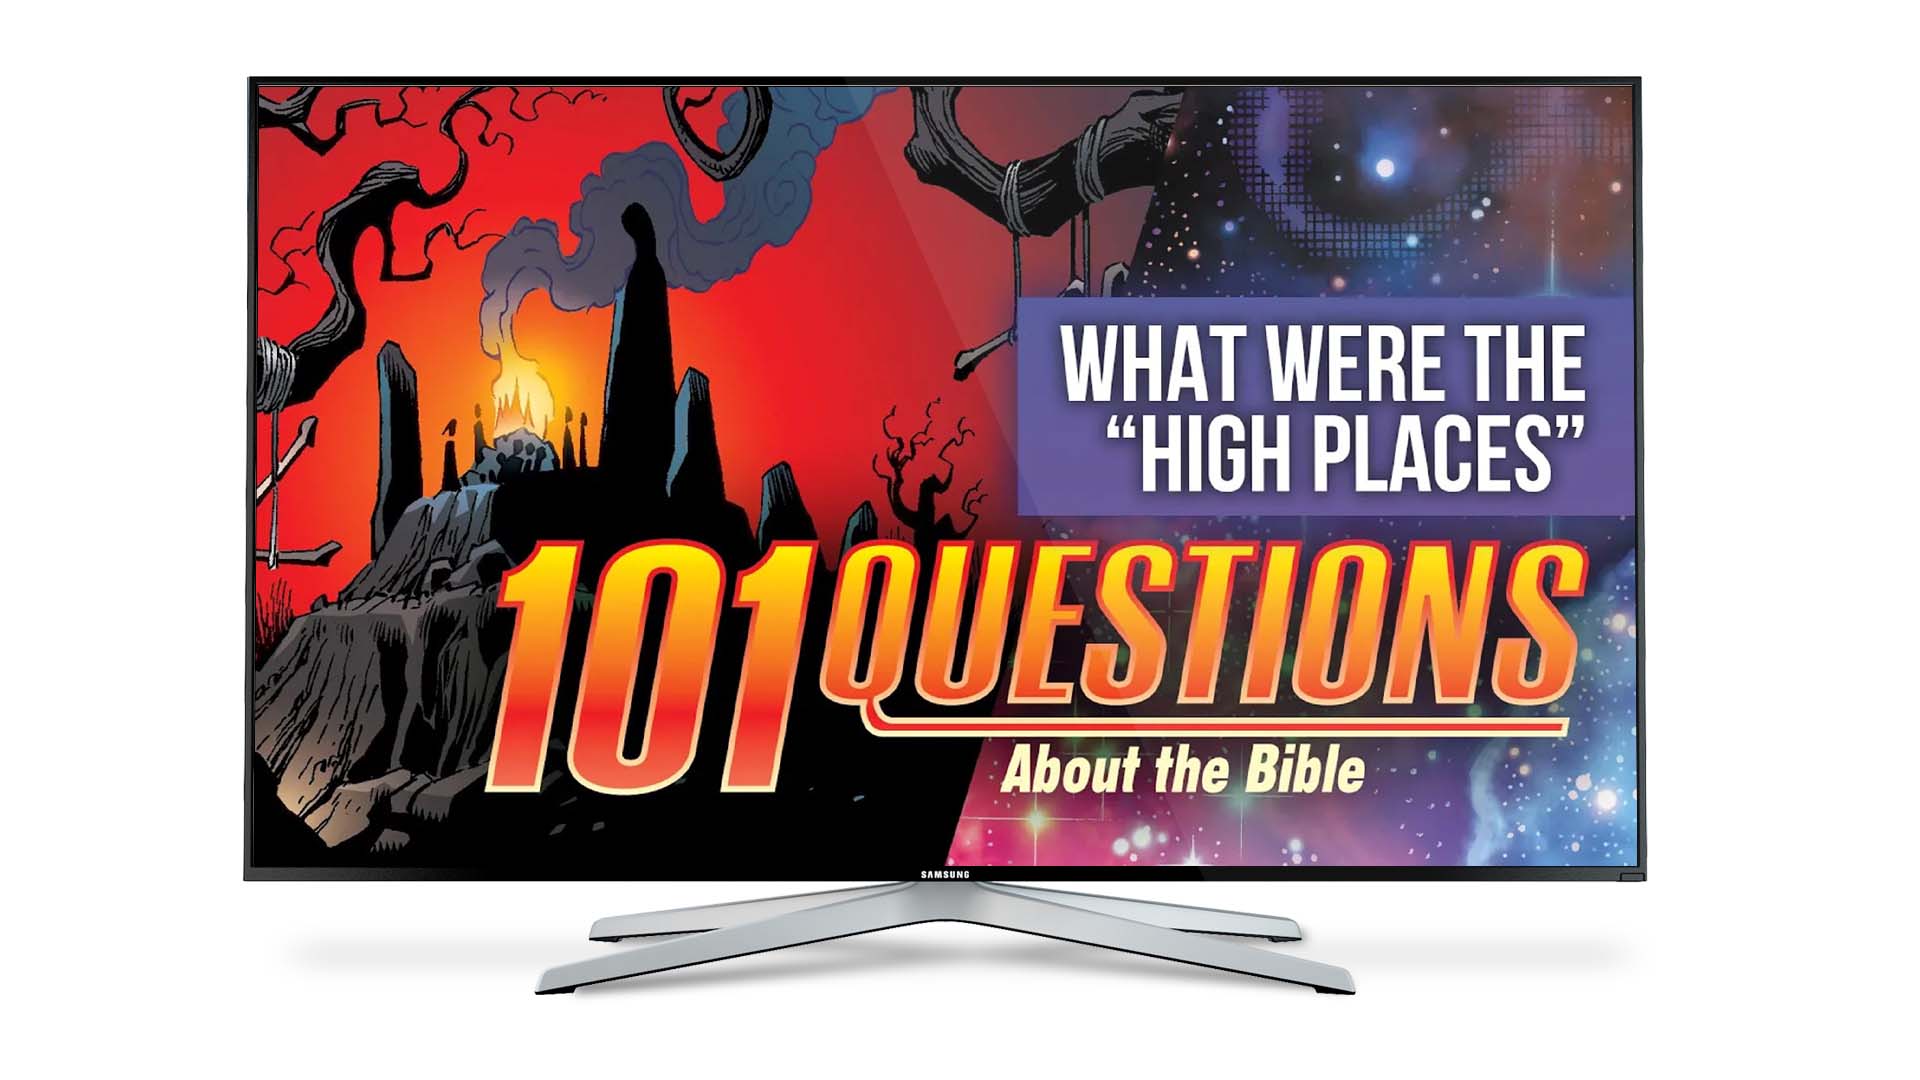 Motion Comic: 101 Questions #10 - What were the high places in the Bible?